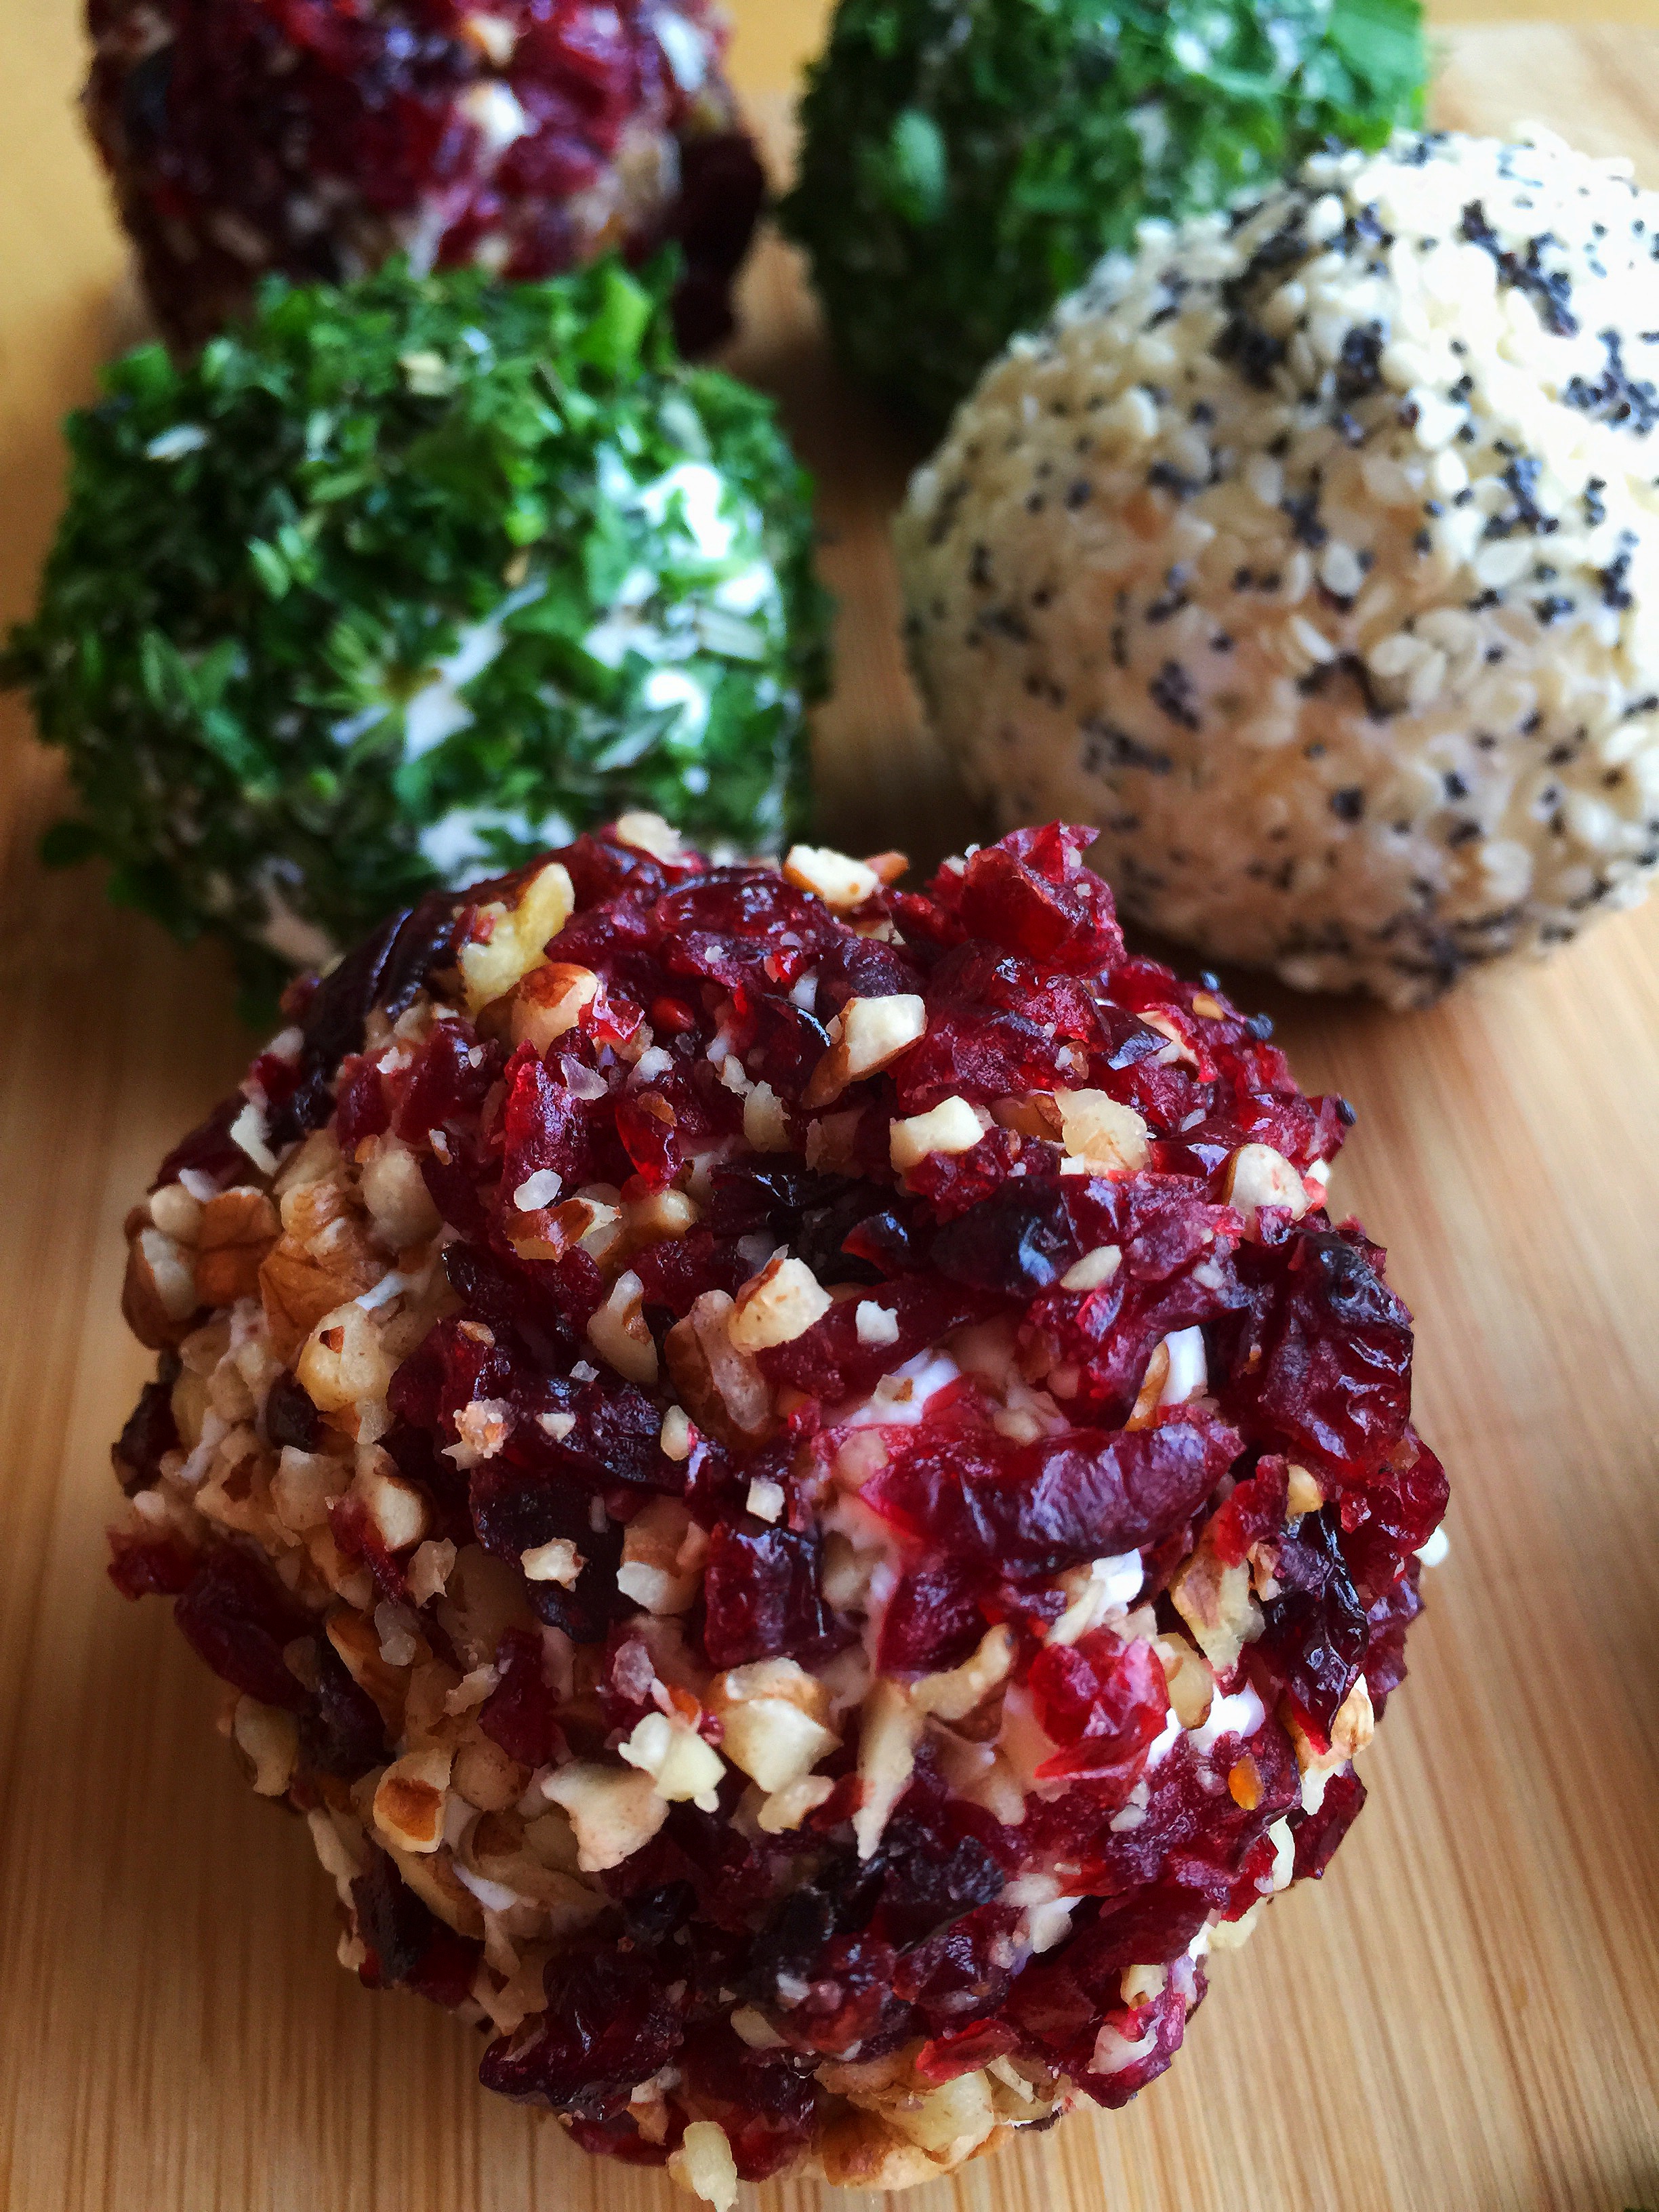 Savor The Holidays With Mini Cheese Balls © www.roastedbeanz.com #CookingUpHolidays #ad #lunchbox